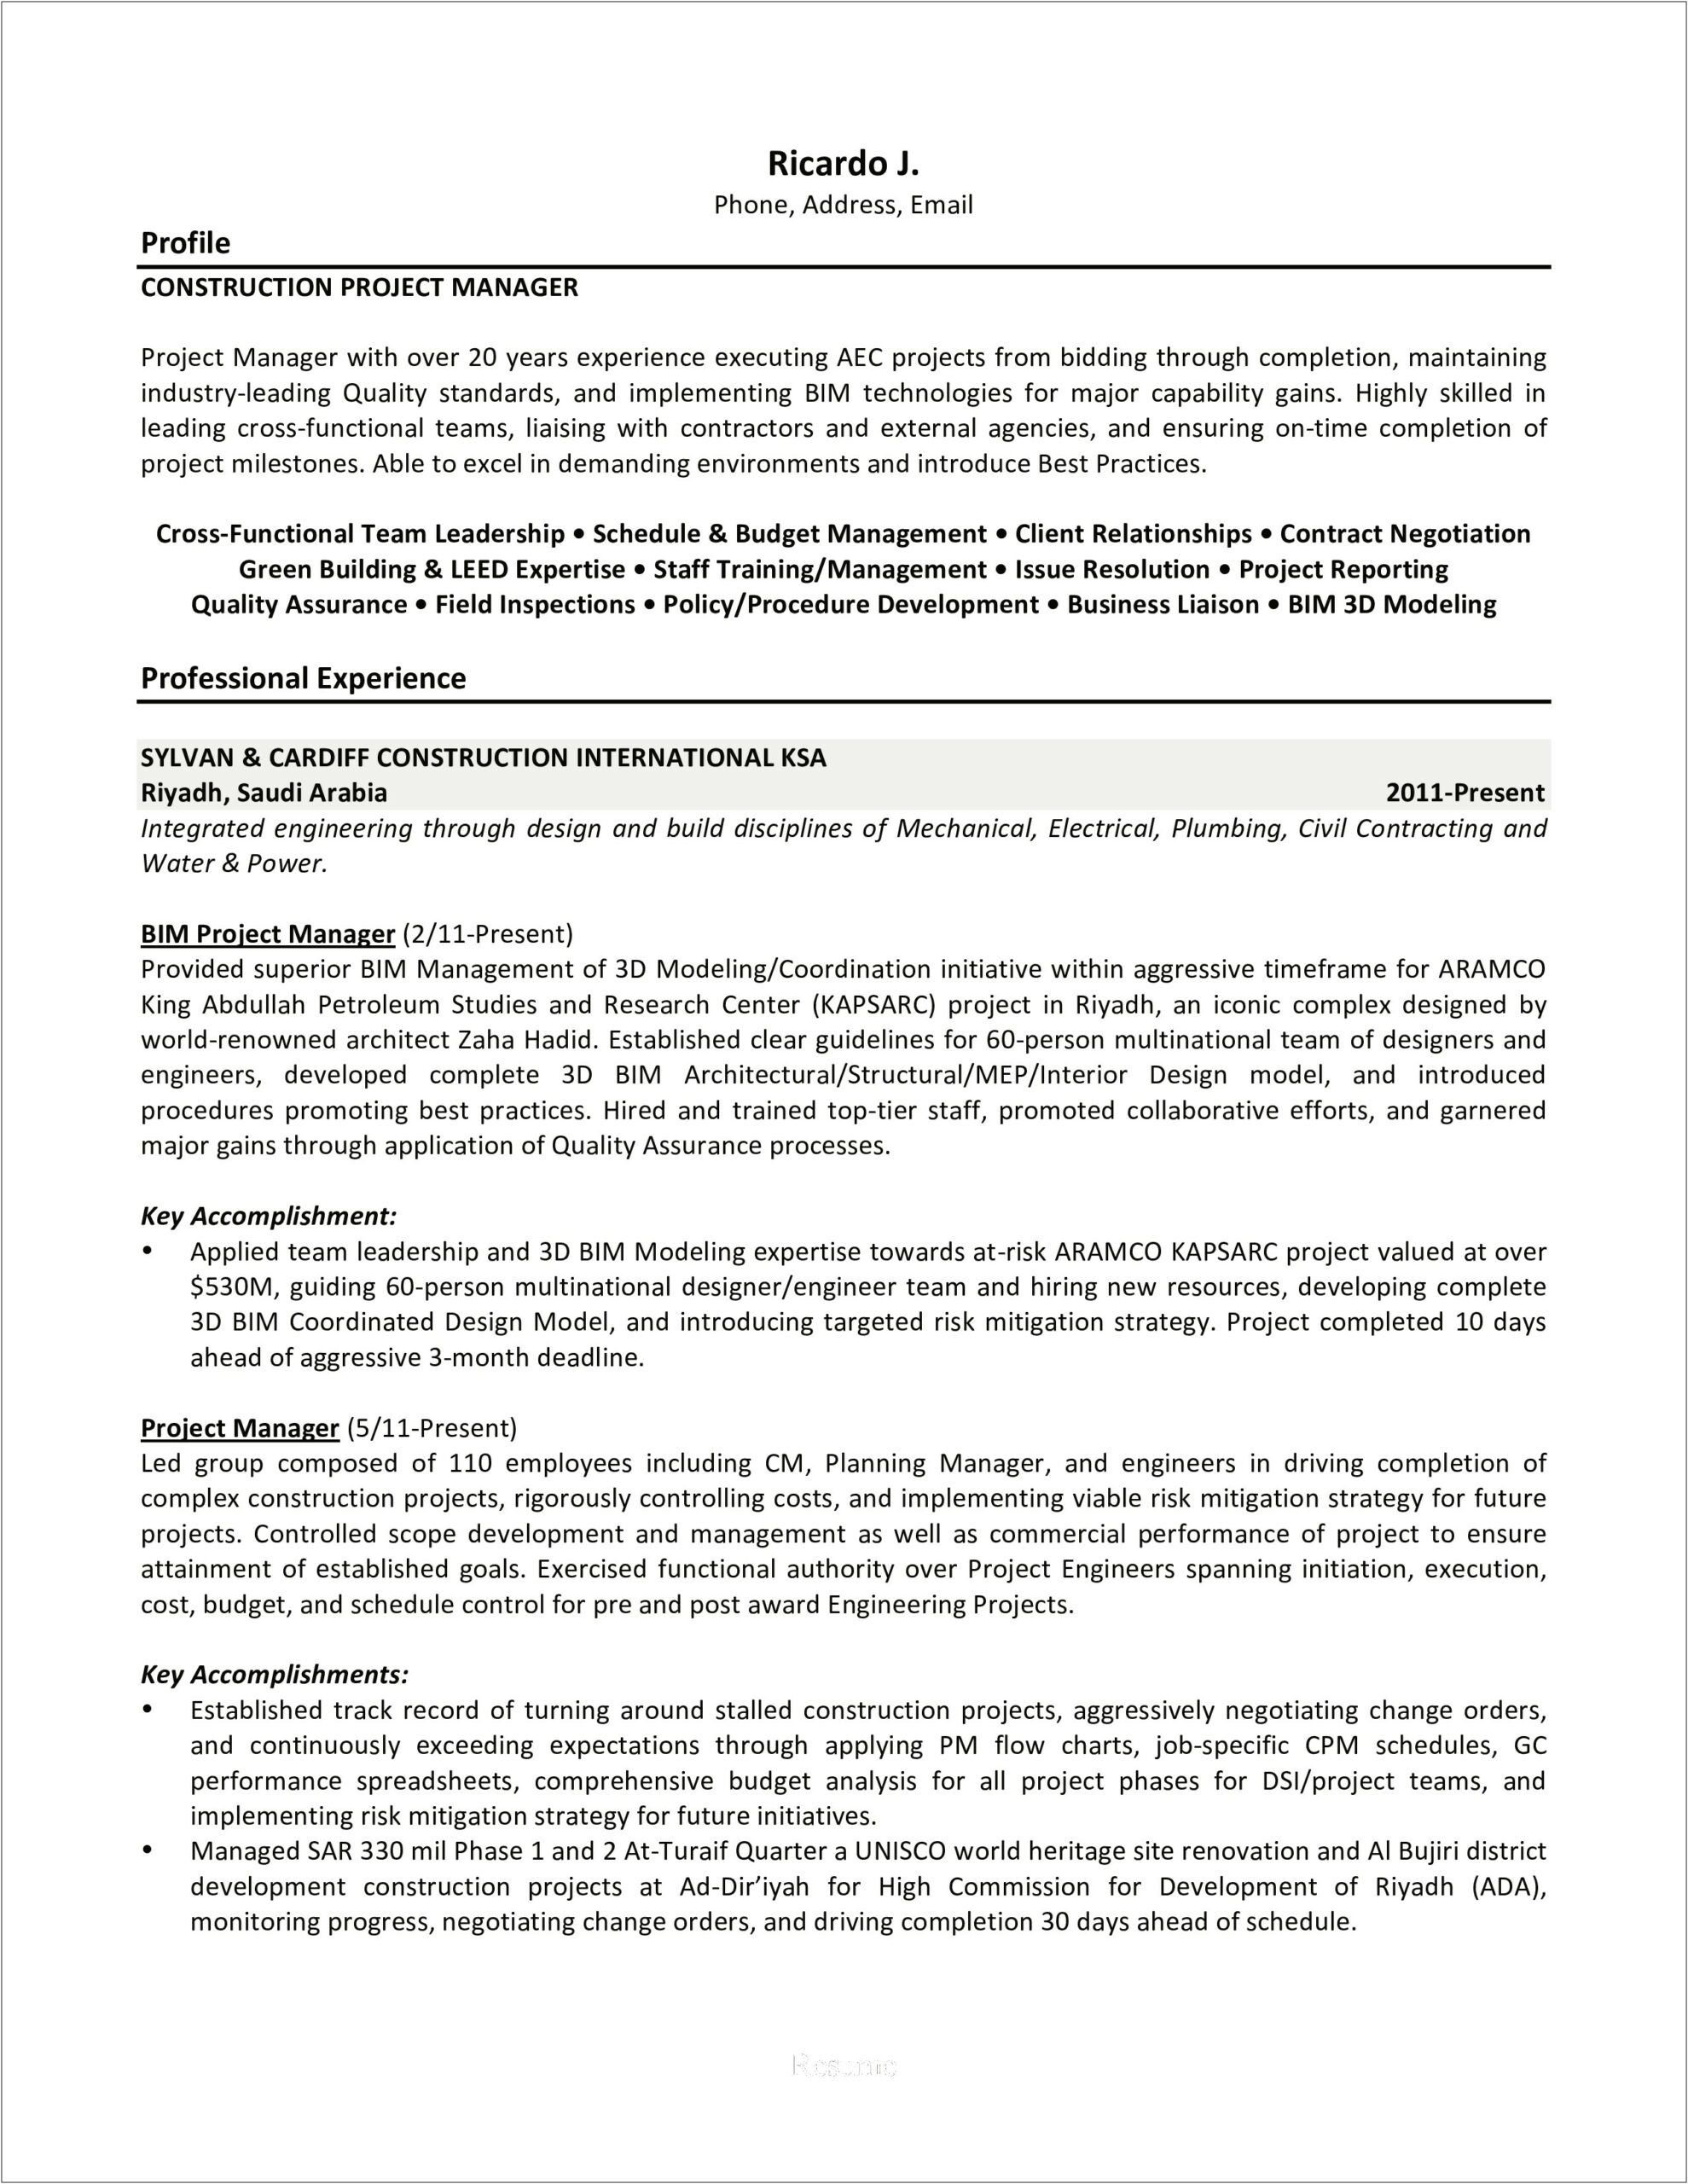 Construction Project Manager Role Resume